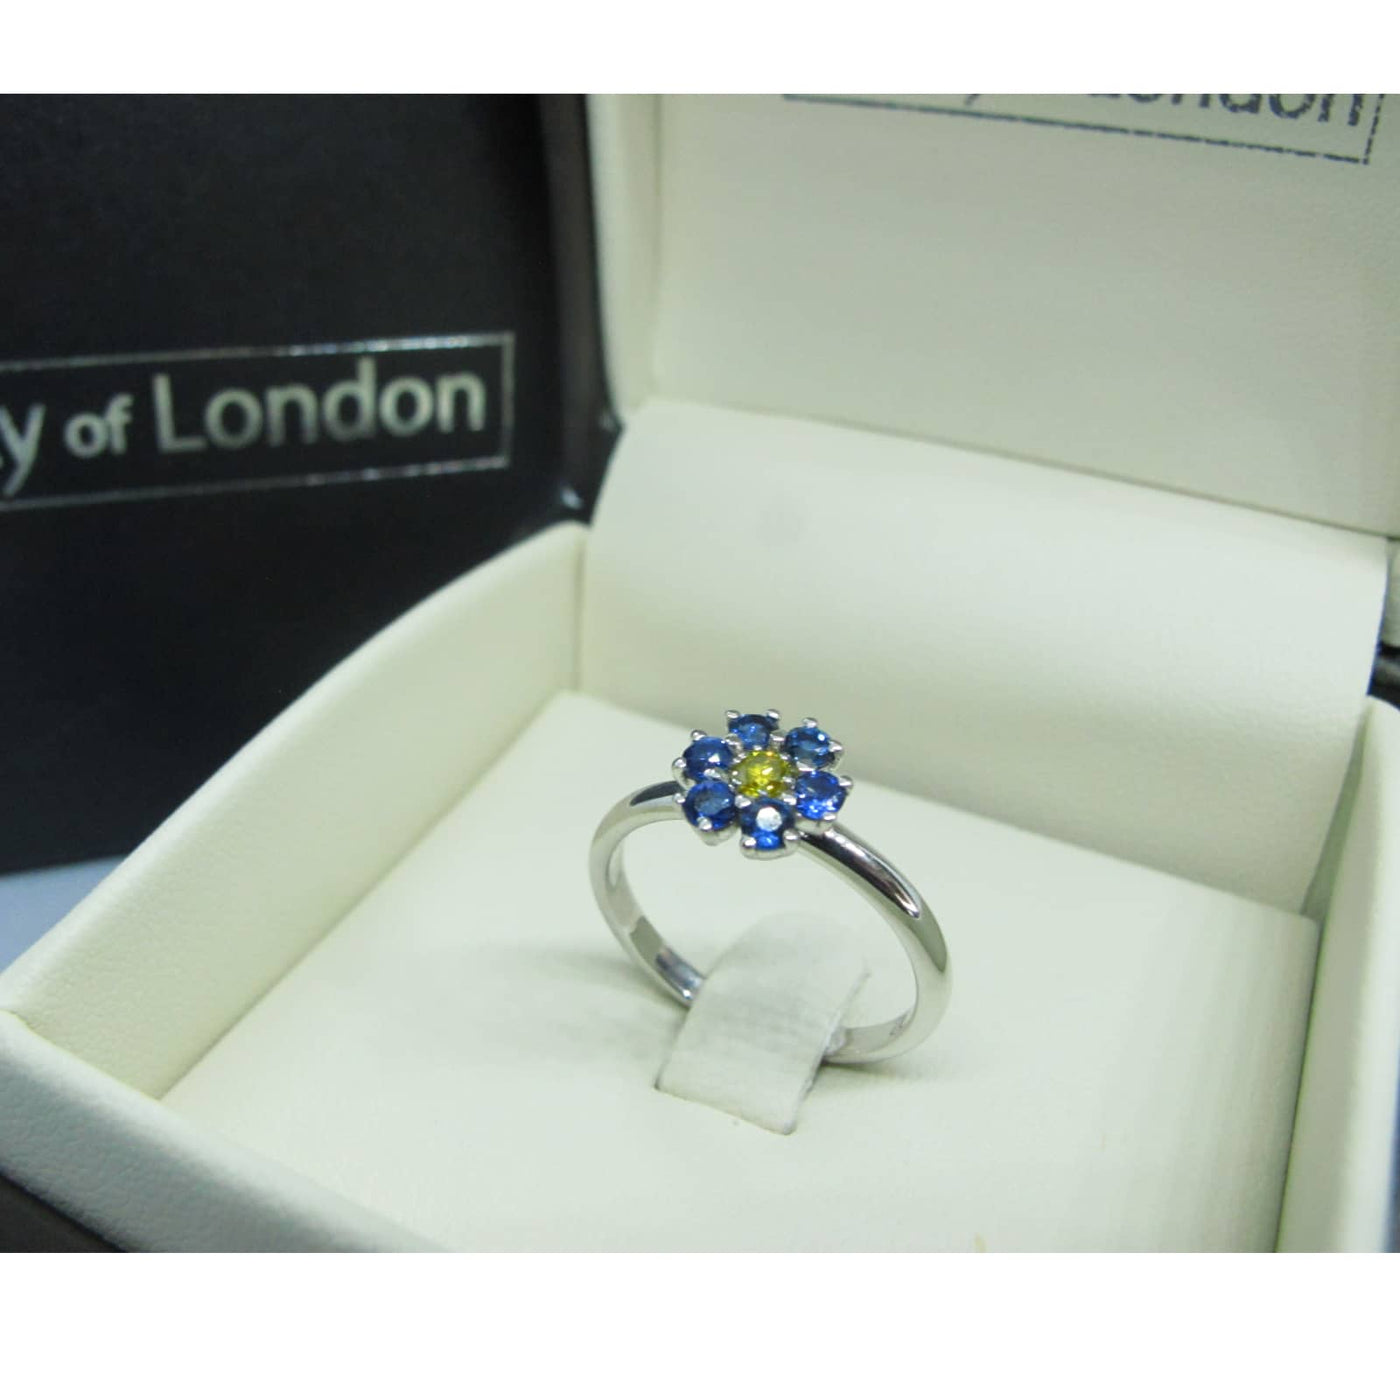 Solitaire Ring with Sapphires and Fancy Yellow Diamond